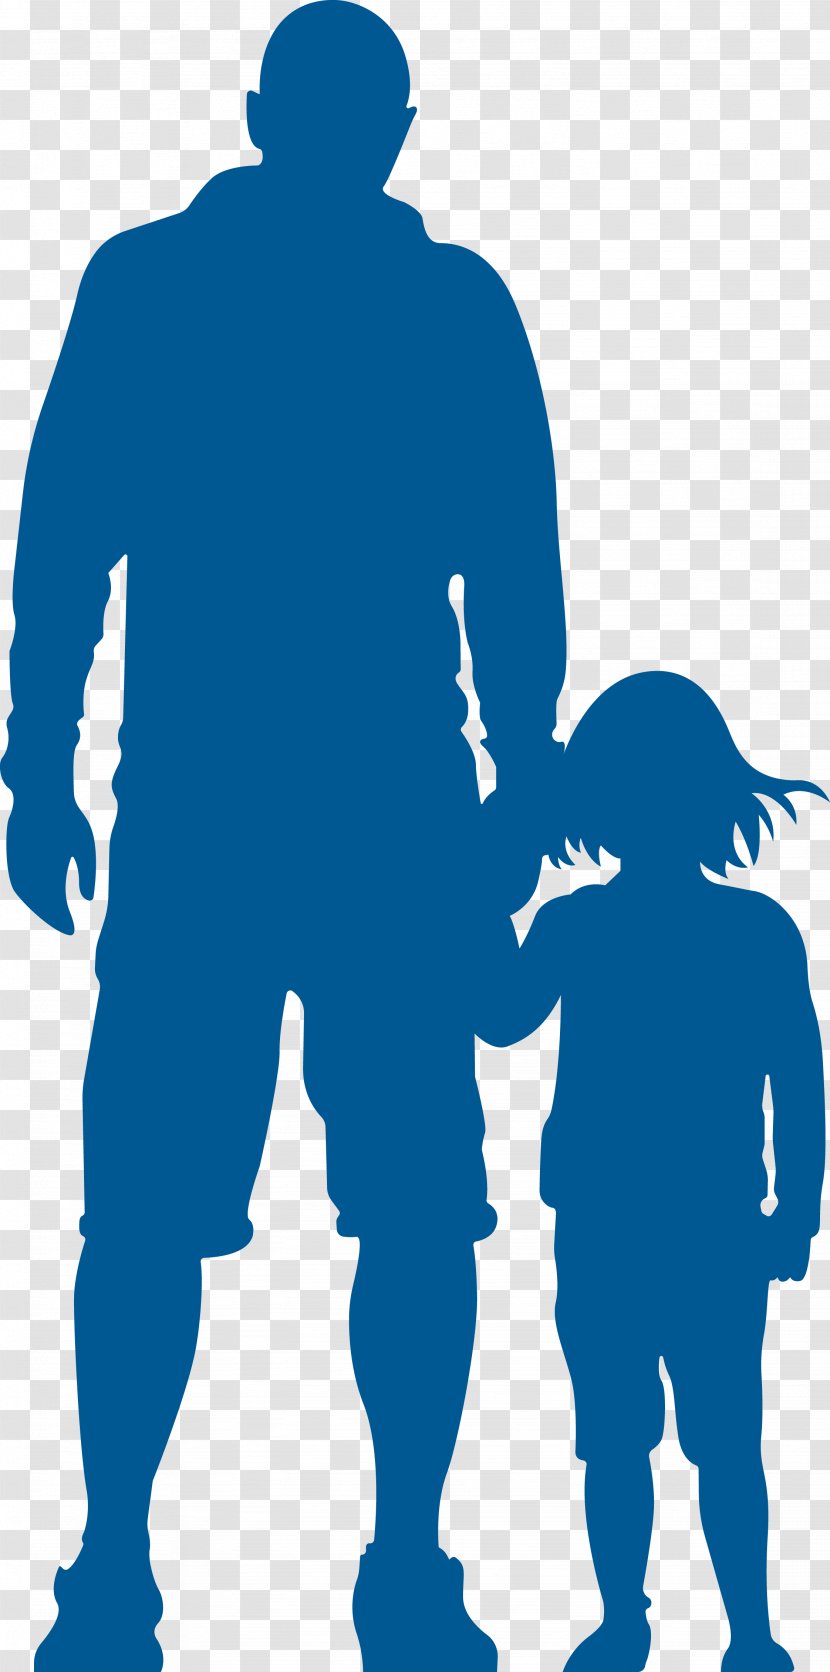 Fathers Day Birthday Wish Son - Human Behavior - Father And Child Transparent PNG